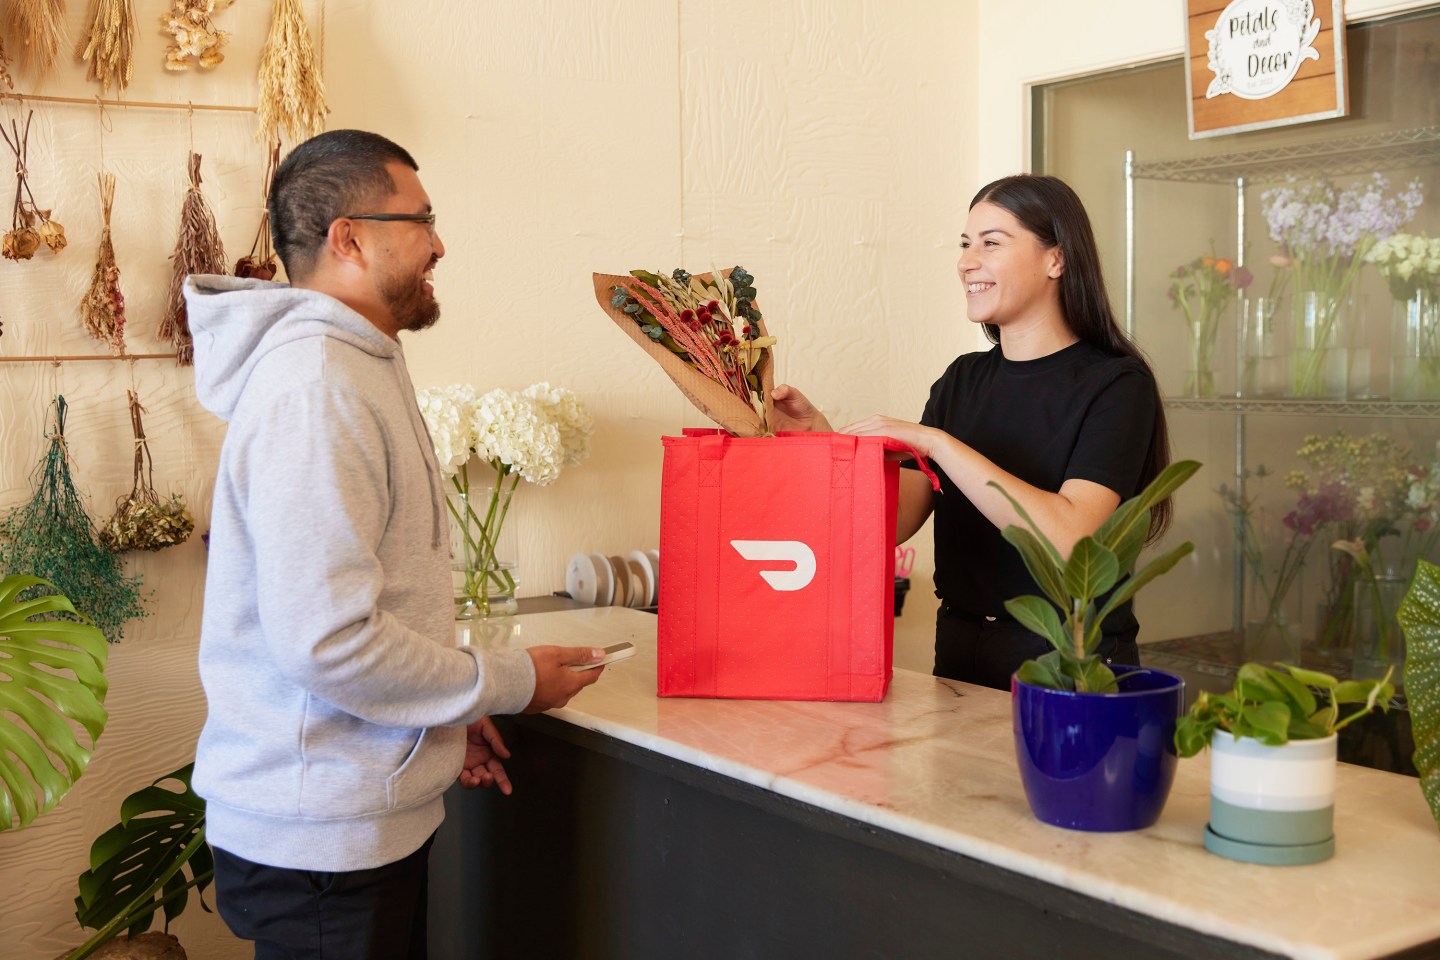 SAN FRANCISCO, CALIFORNIA - APRIL 2024: In this photo illustration, a person demonstrates making a delivery with DoorDash as a Dasher in April 2024 in San Francisco, California (Photo Illustration by Emily Dulla/Getty Images for DoorDash)